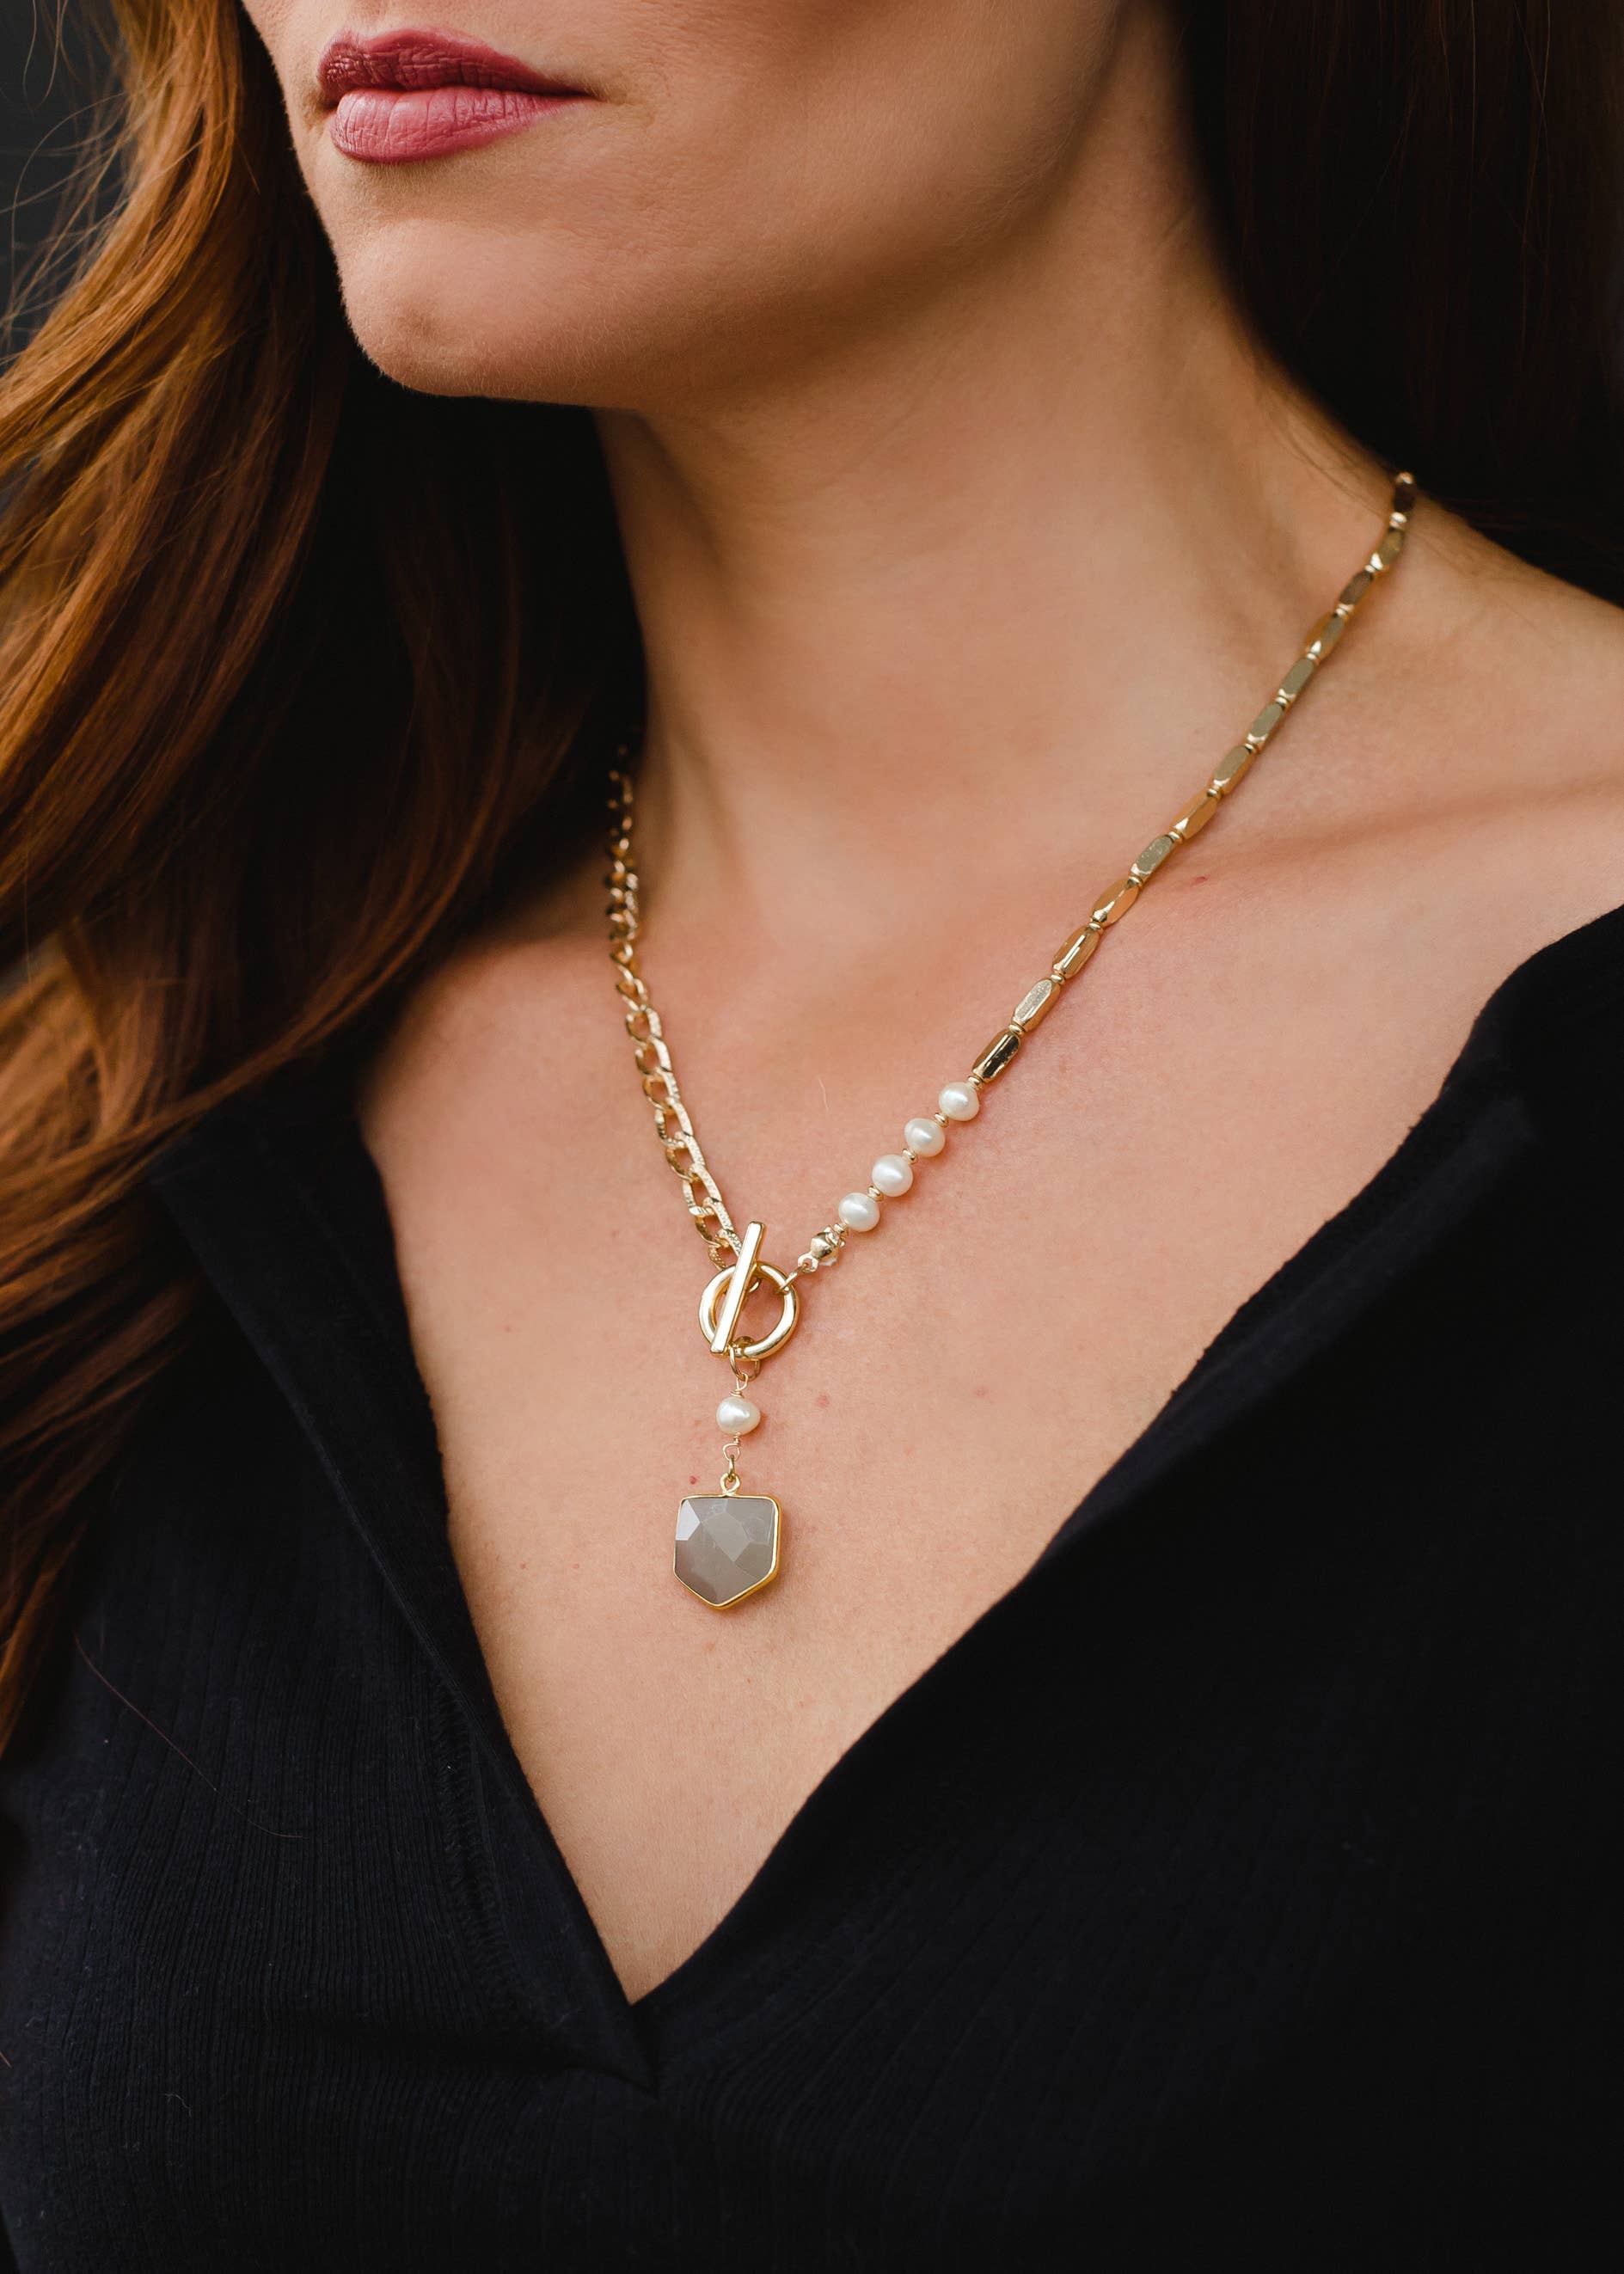 Gold Chain Necklace with Stone Pendant Fall-Winter Panache Apparel Co.